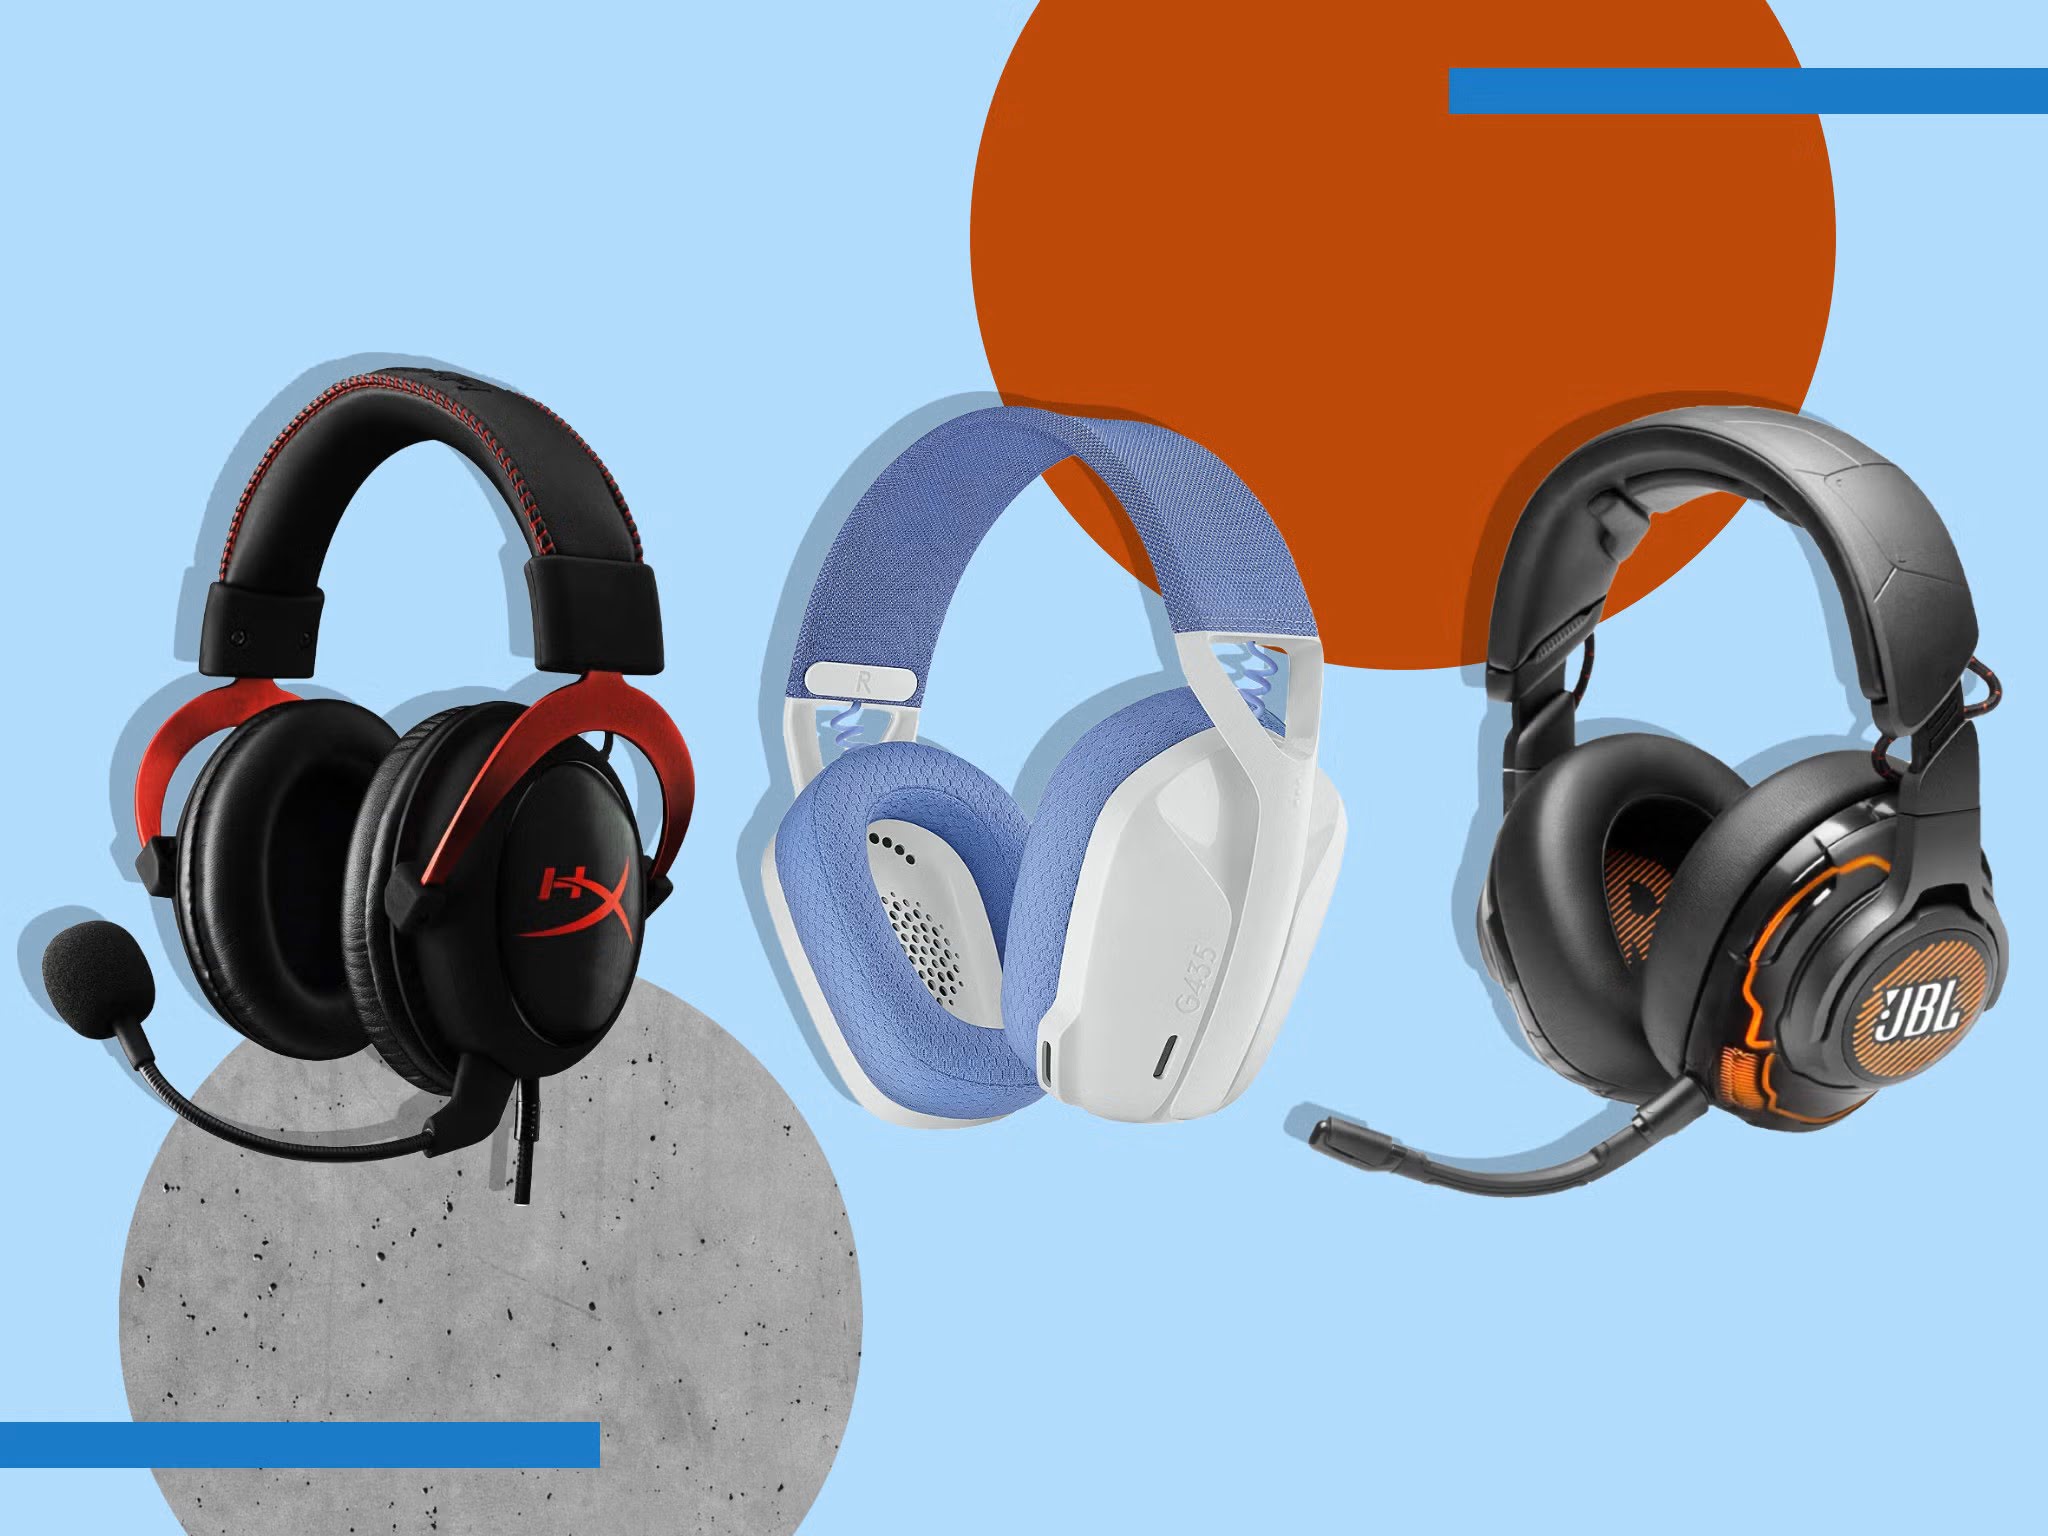 Top Gaming Headset Review: Find the Perfect Choice